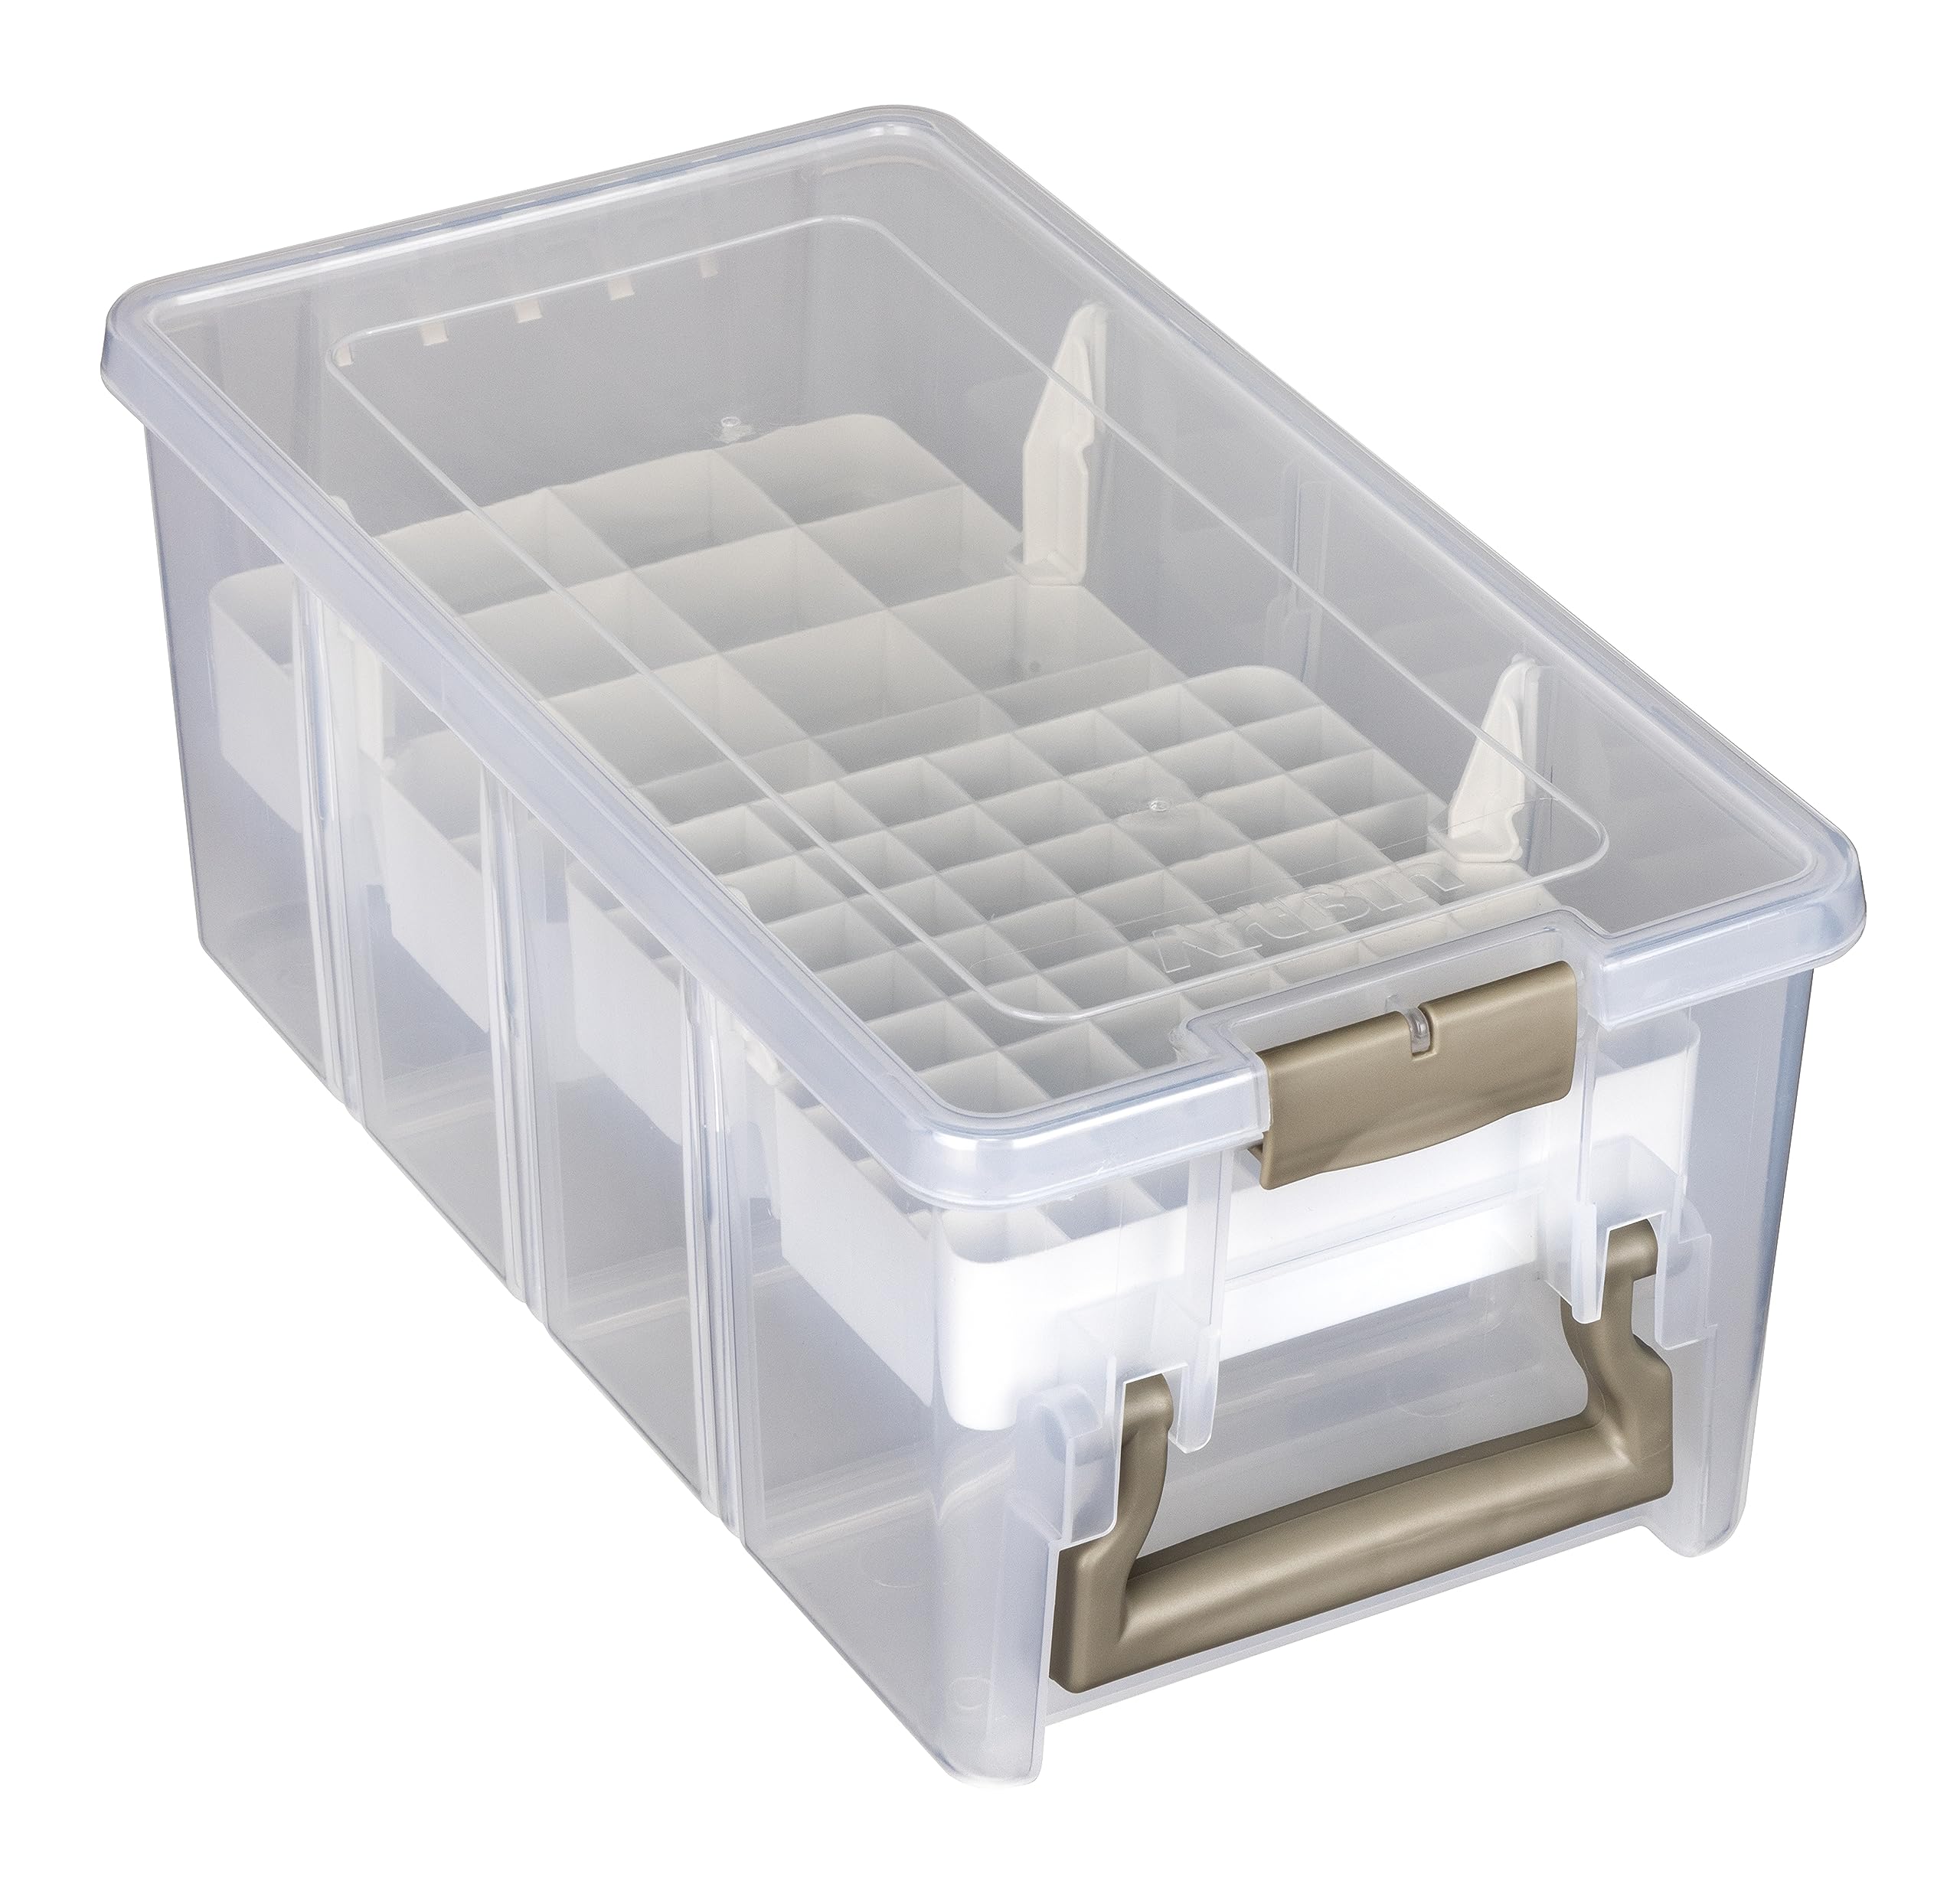 ArtBin Semi Satchel with Accessory Trays Storage Container, Clear